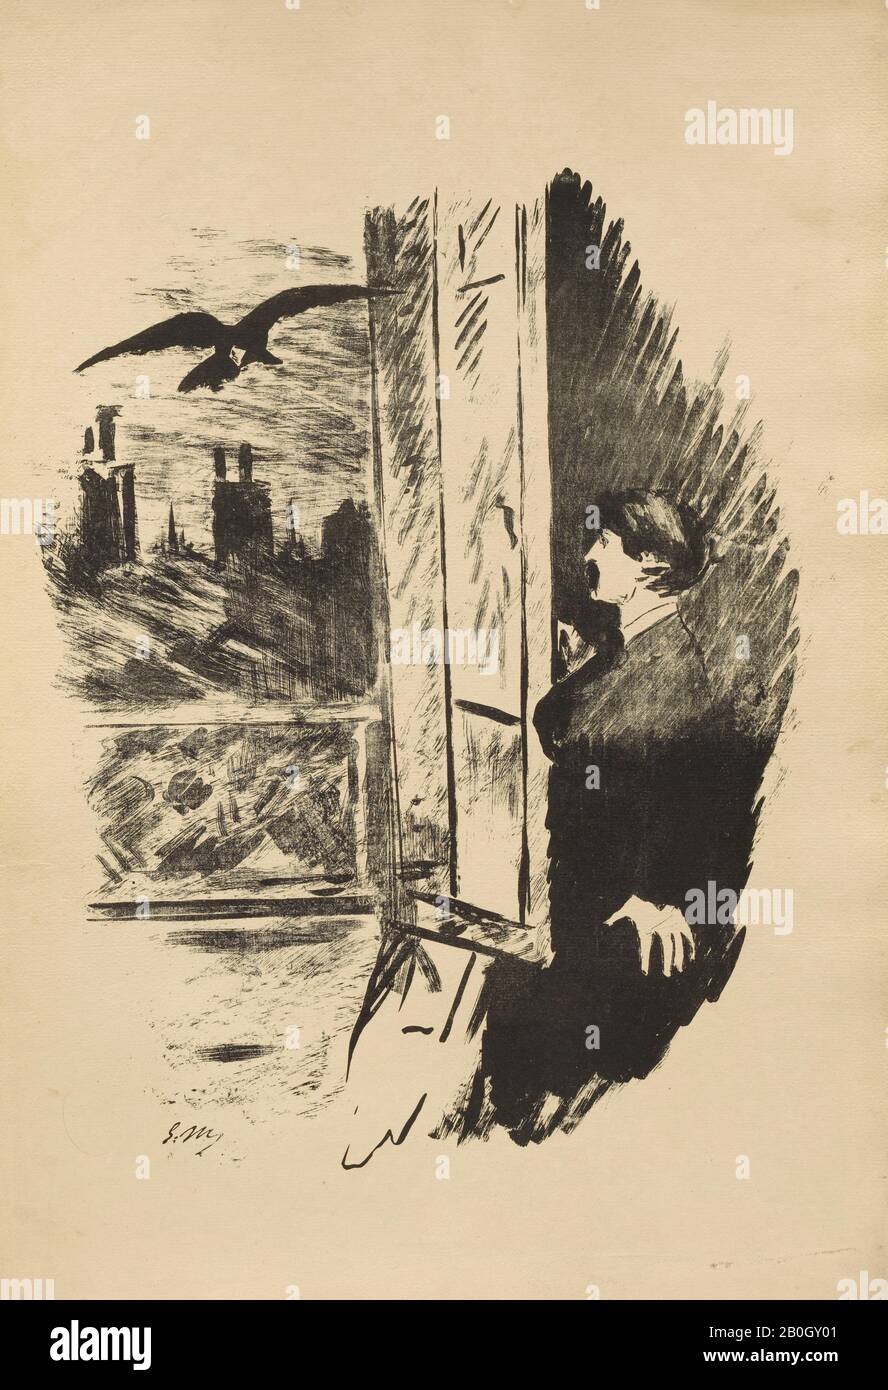 Édouard Manet, French, 1832–1883, Edgar Allan Poe, (American, 1809–1849), Raven in Flight (ex libris), From The Raven, 1875, Lithograph on paper, Plate: 10 1/8 x 11 1/4 in. (25.7 x 28.6 cm Stock Photo